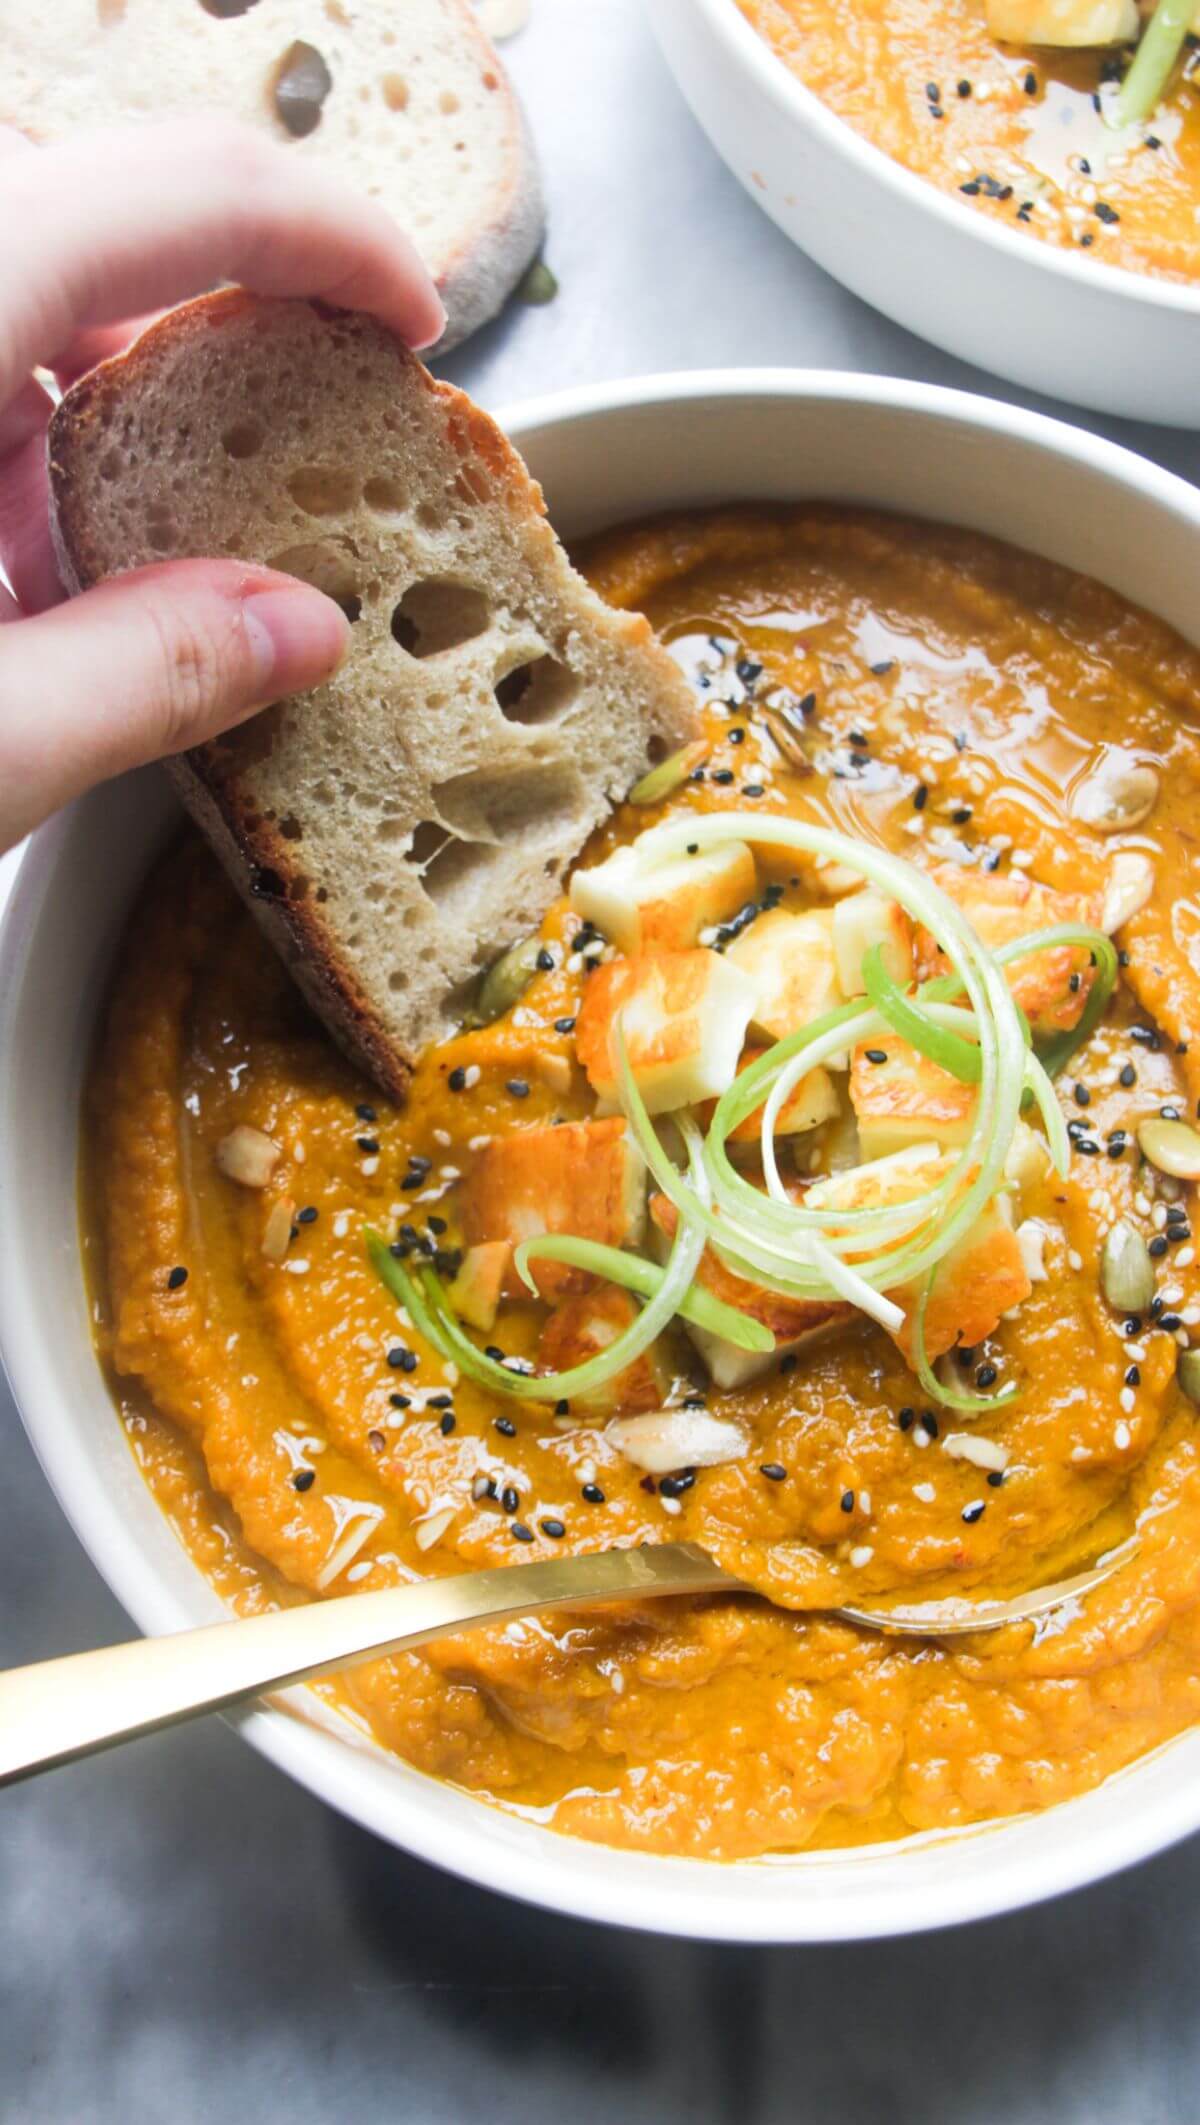 A hand dipping a slice of bread into a bowl of carrot and coriander soup with halloumi croutons.